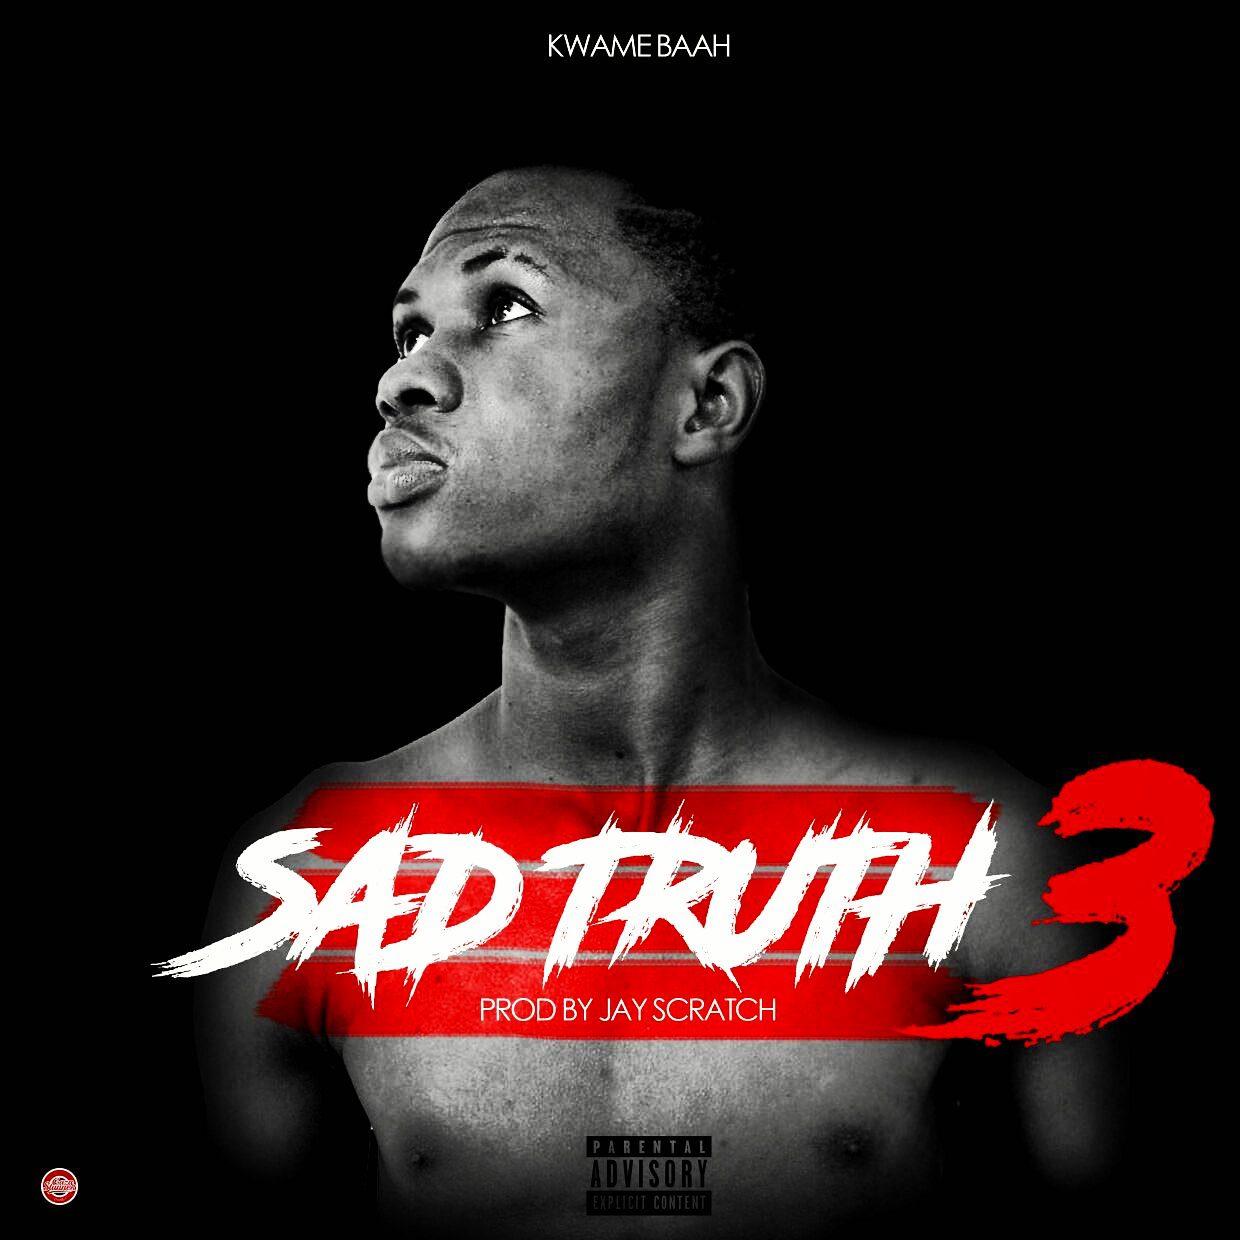 Kwame Baah – Sad Truth 3 (prod.by Jay Scratch)